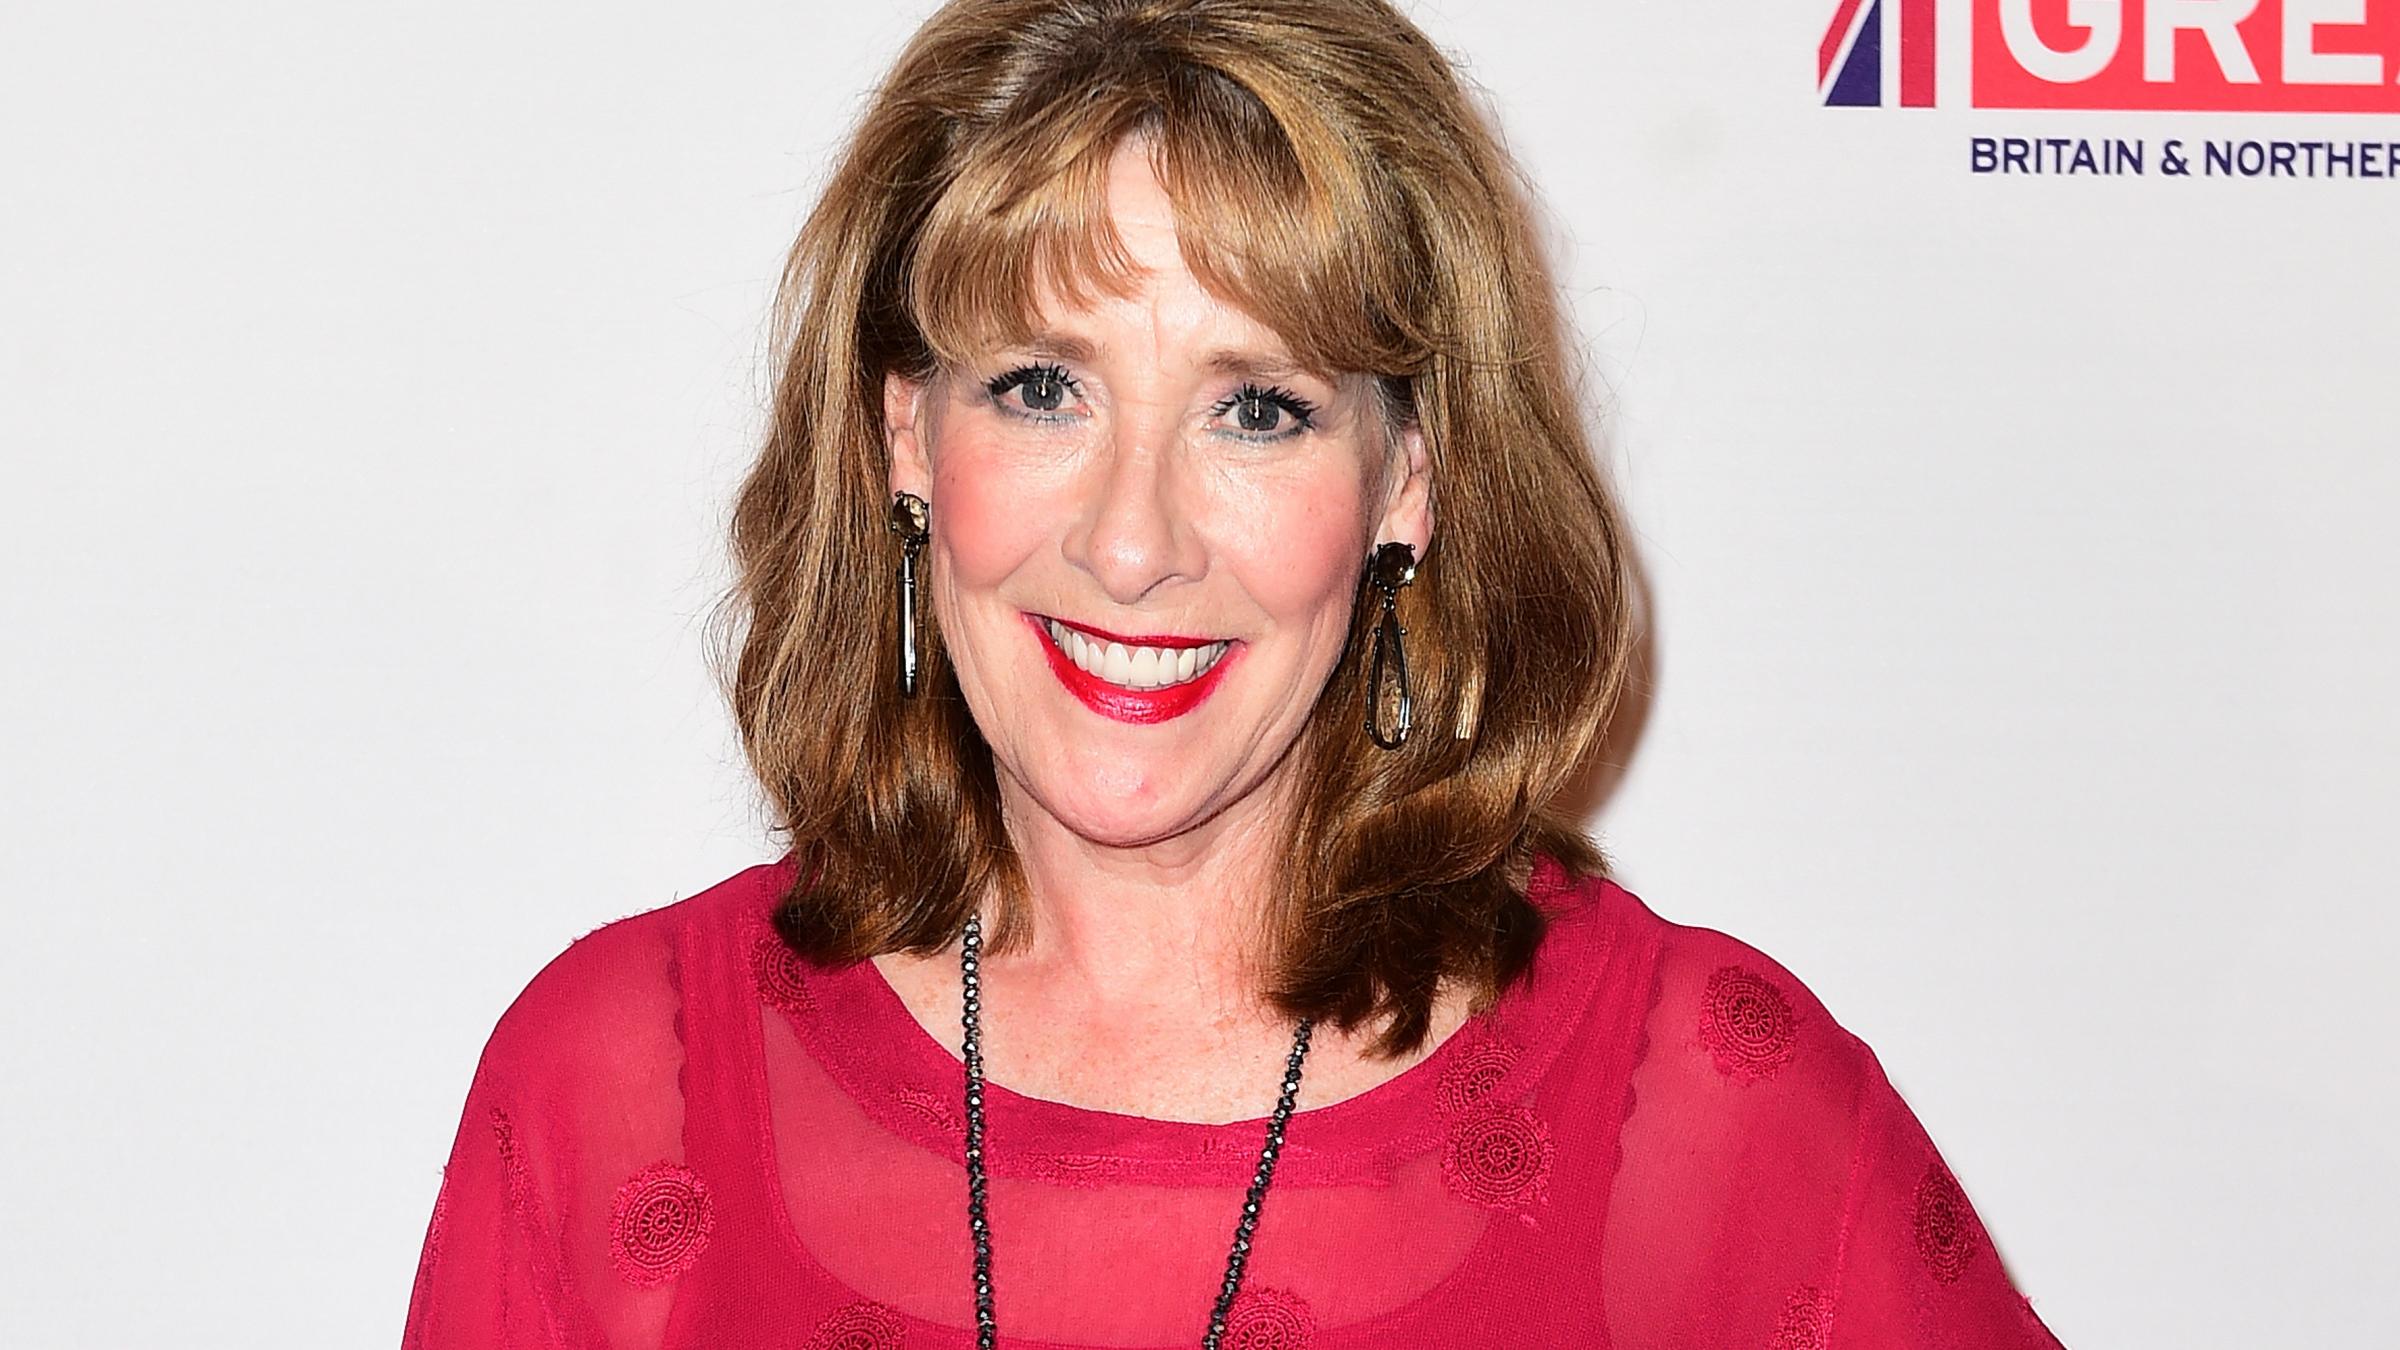 Downton cast would love last hurrah with film, says Phyllis Logan